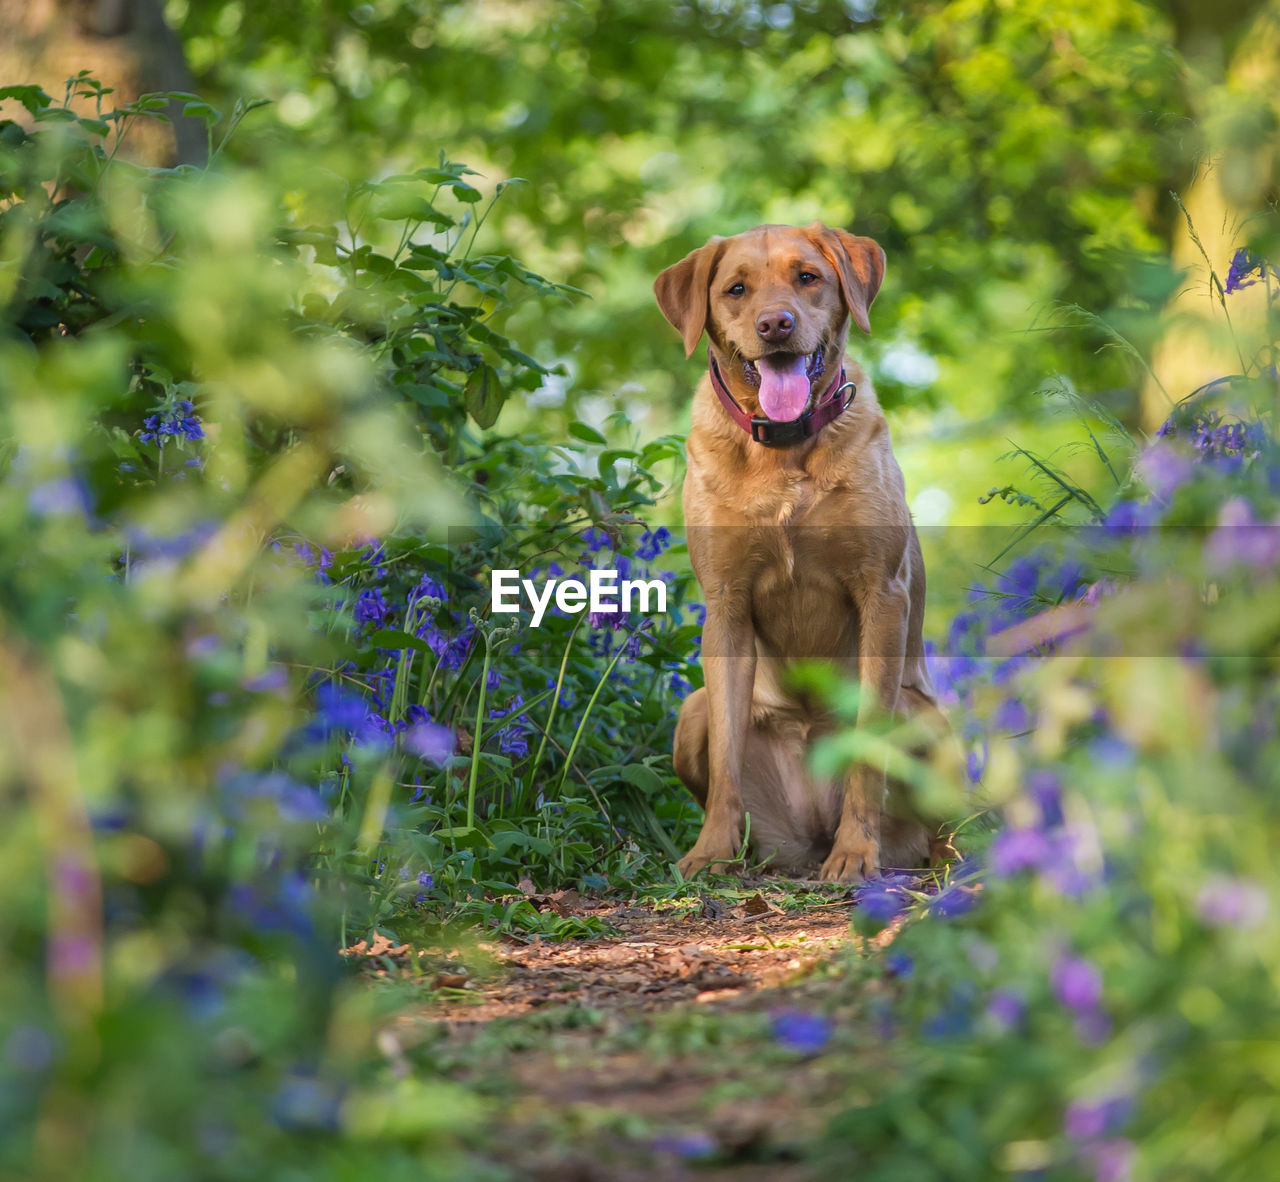 Happy pet labrador retriever dog sitting in a picturesque bluebell wood